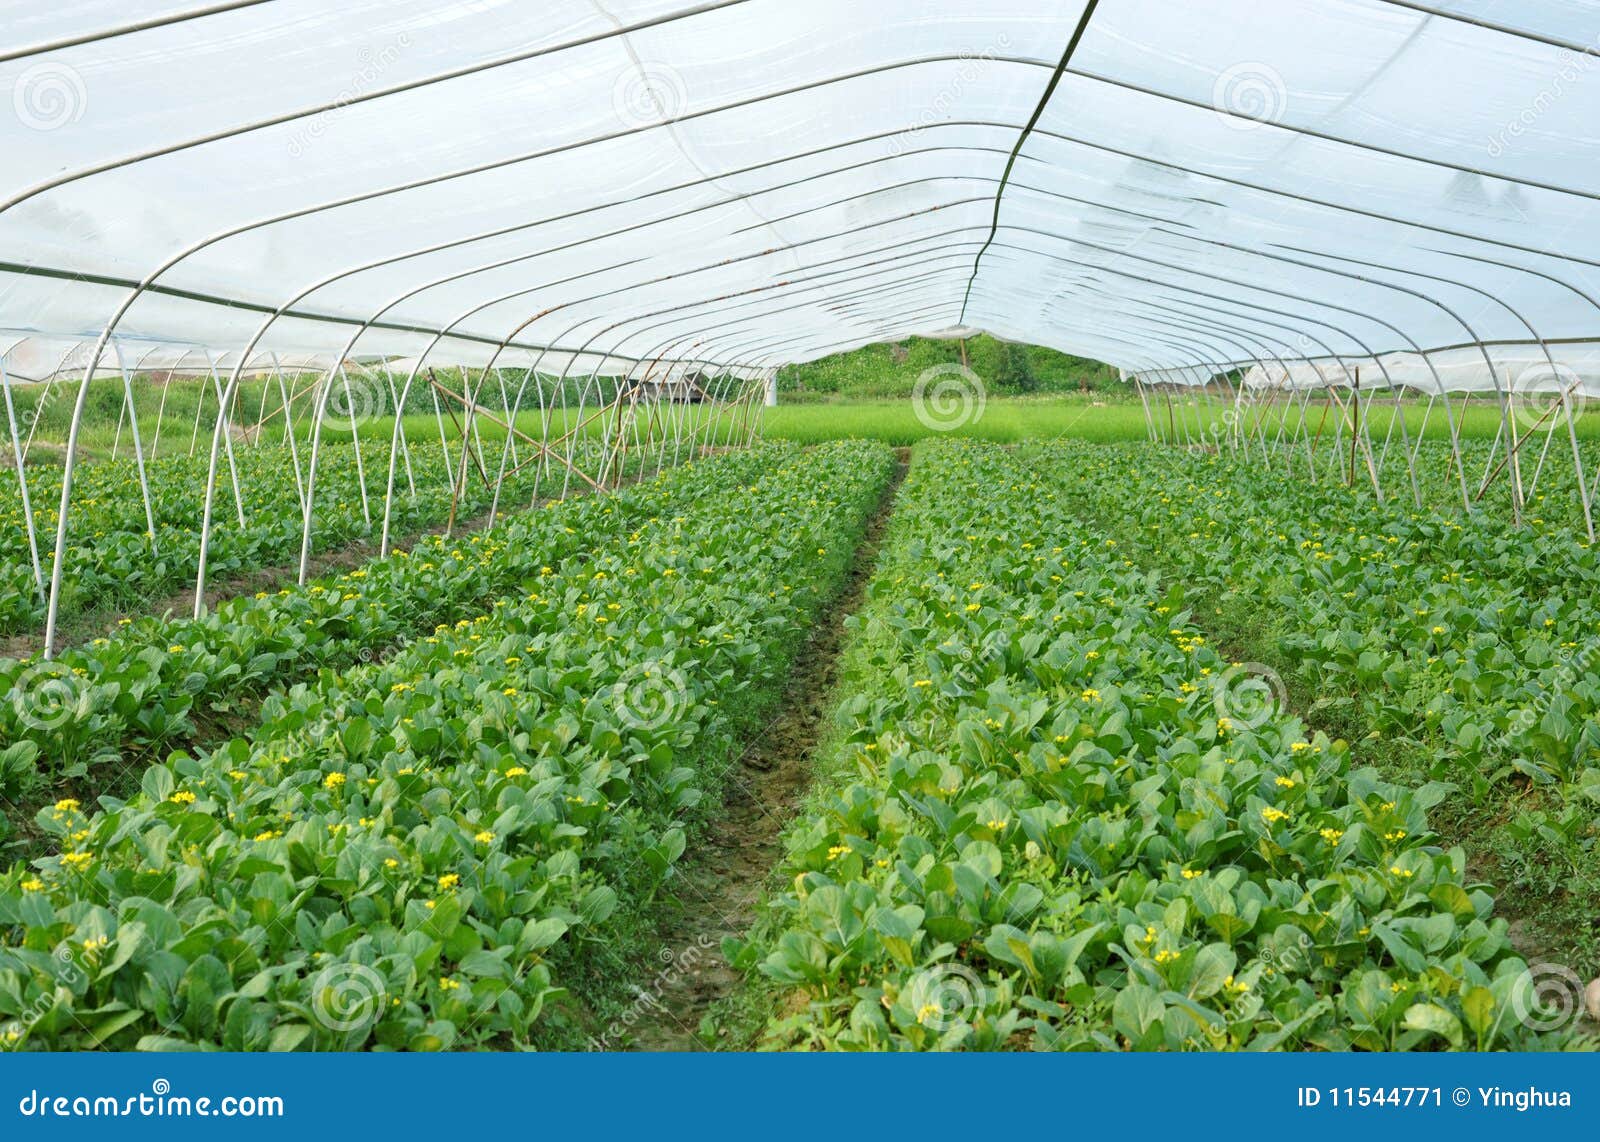 greenhouse cultivation